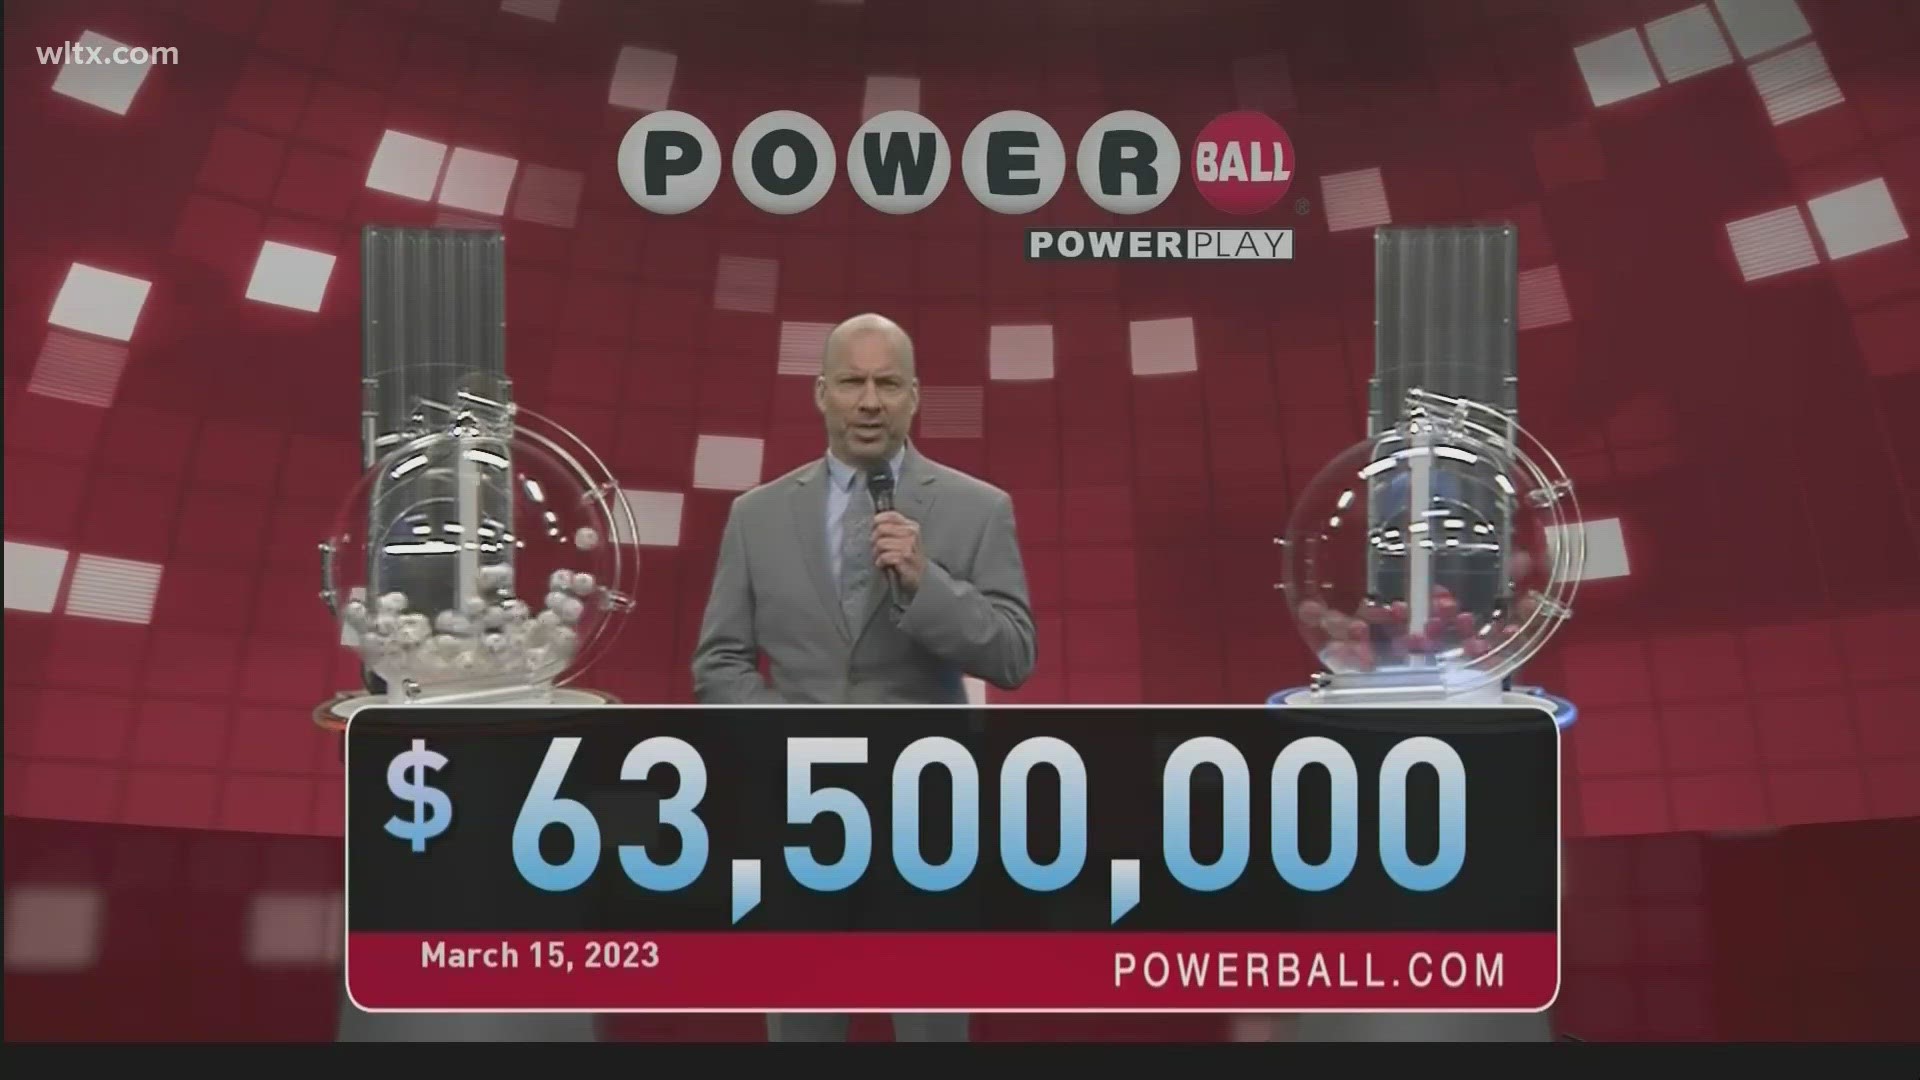 Here are the winning Powerball numbers for Wednesday, March 15, 2023.